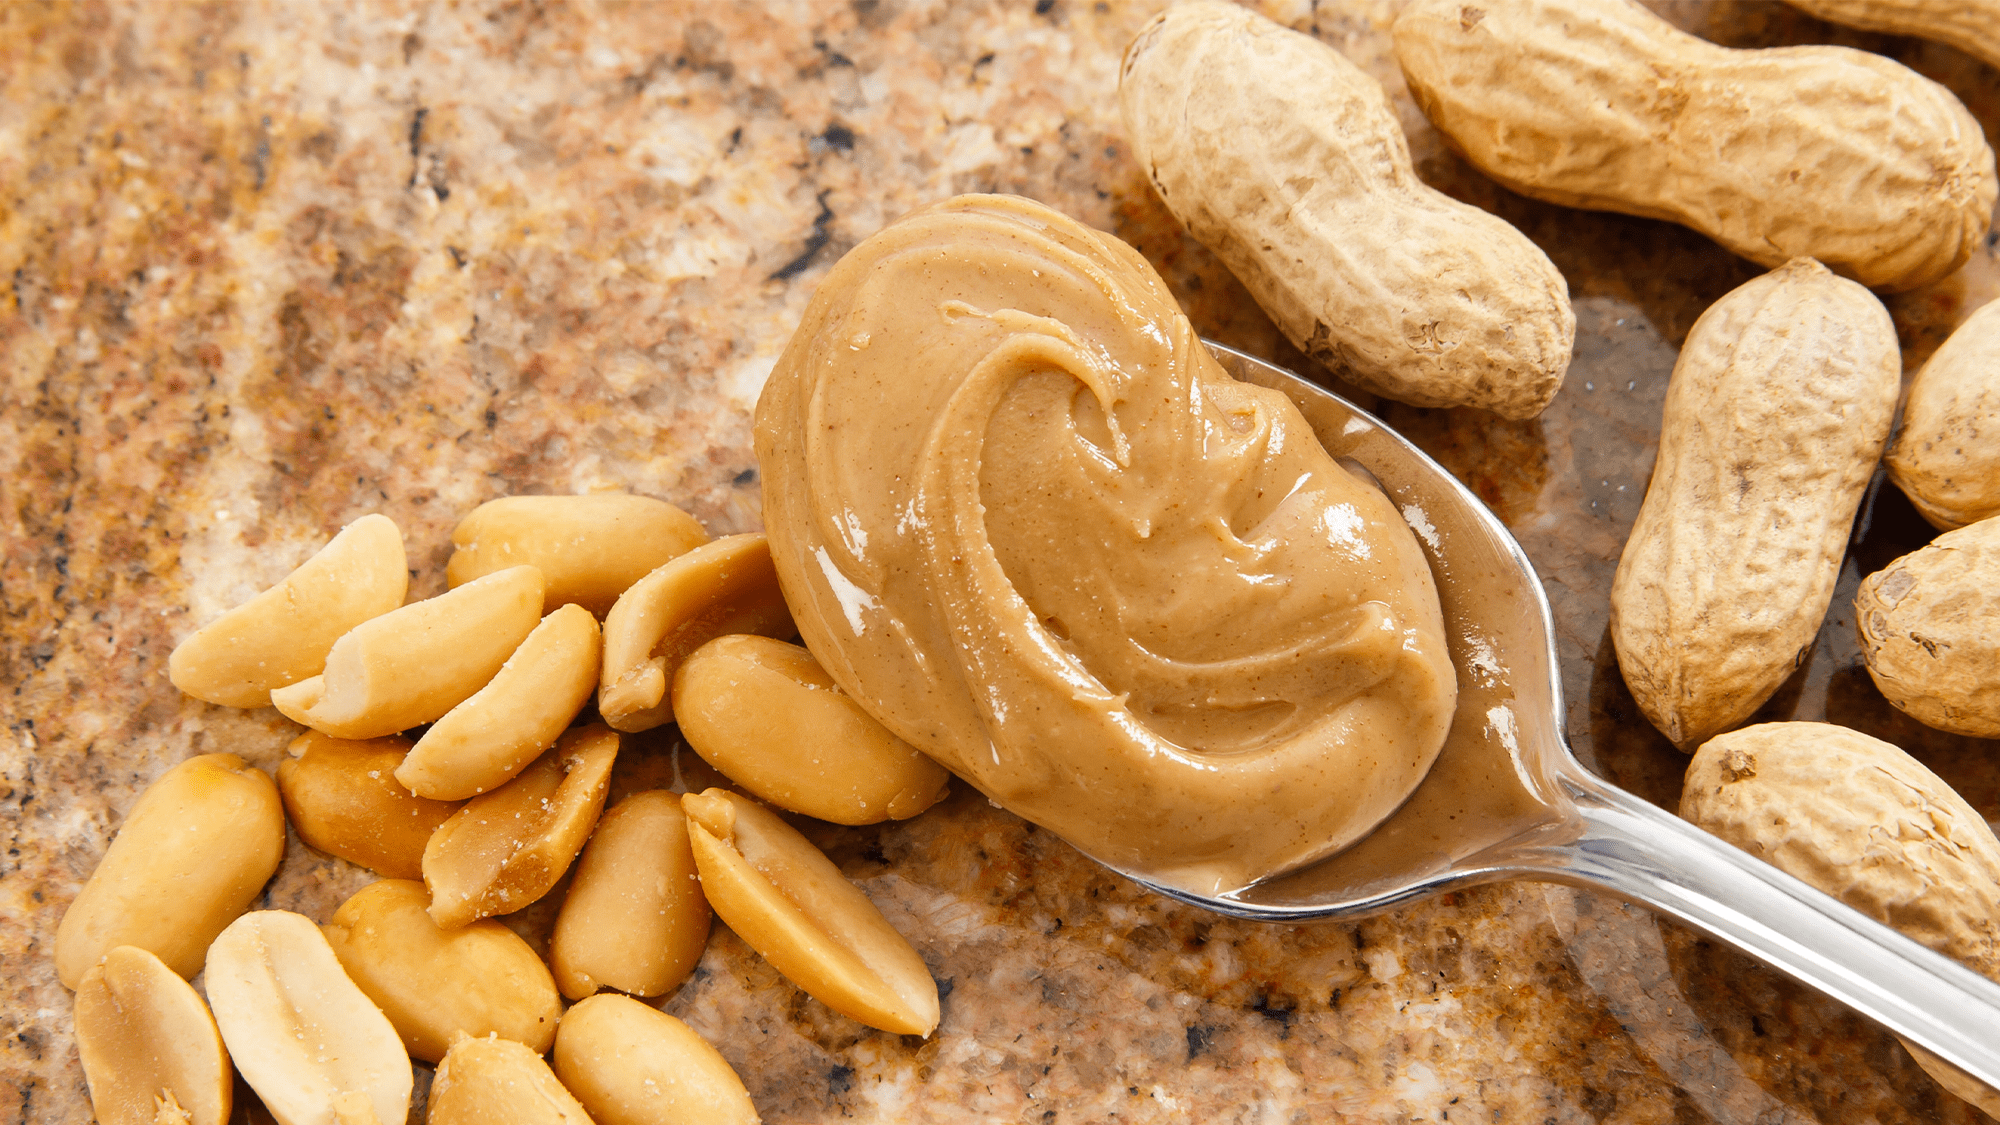 A peanut allergy patch is making headway in trials with toddlers